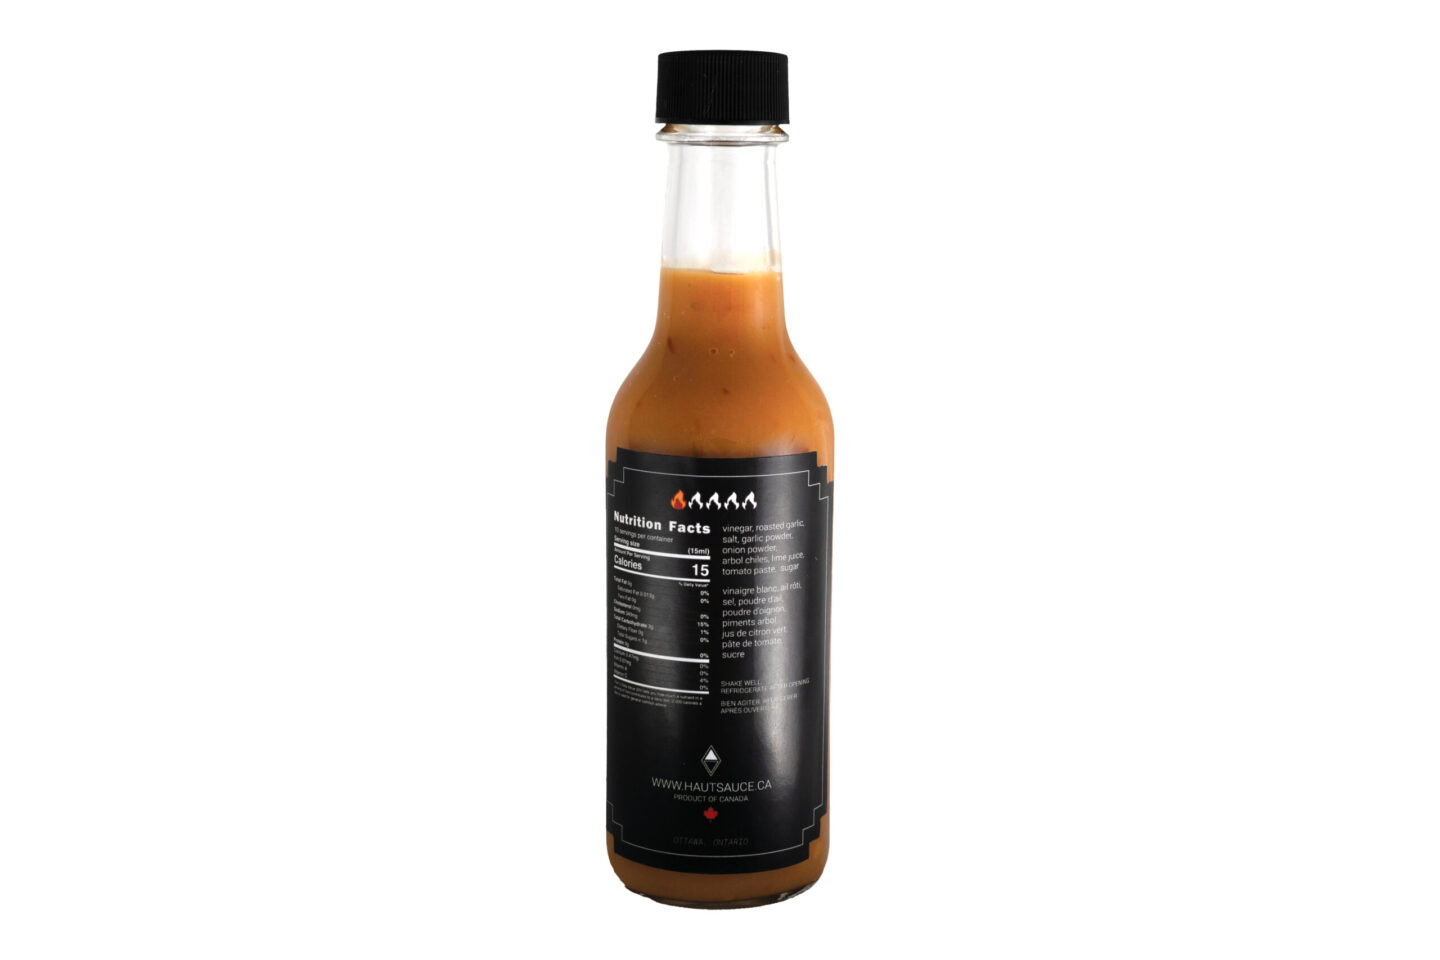 Back label view of The Everyday hot sauce by Haut Sauce Co. Heat scale 1 out of 5. Ingredients vinegar, roasted garlic, salt, garlic powder, onion powder, arbol chiles, lime juice, tomato paste, sugar.